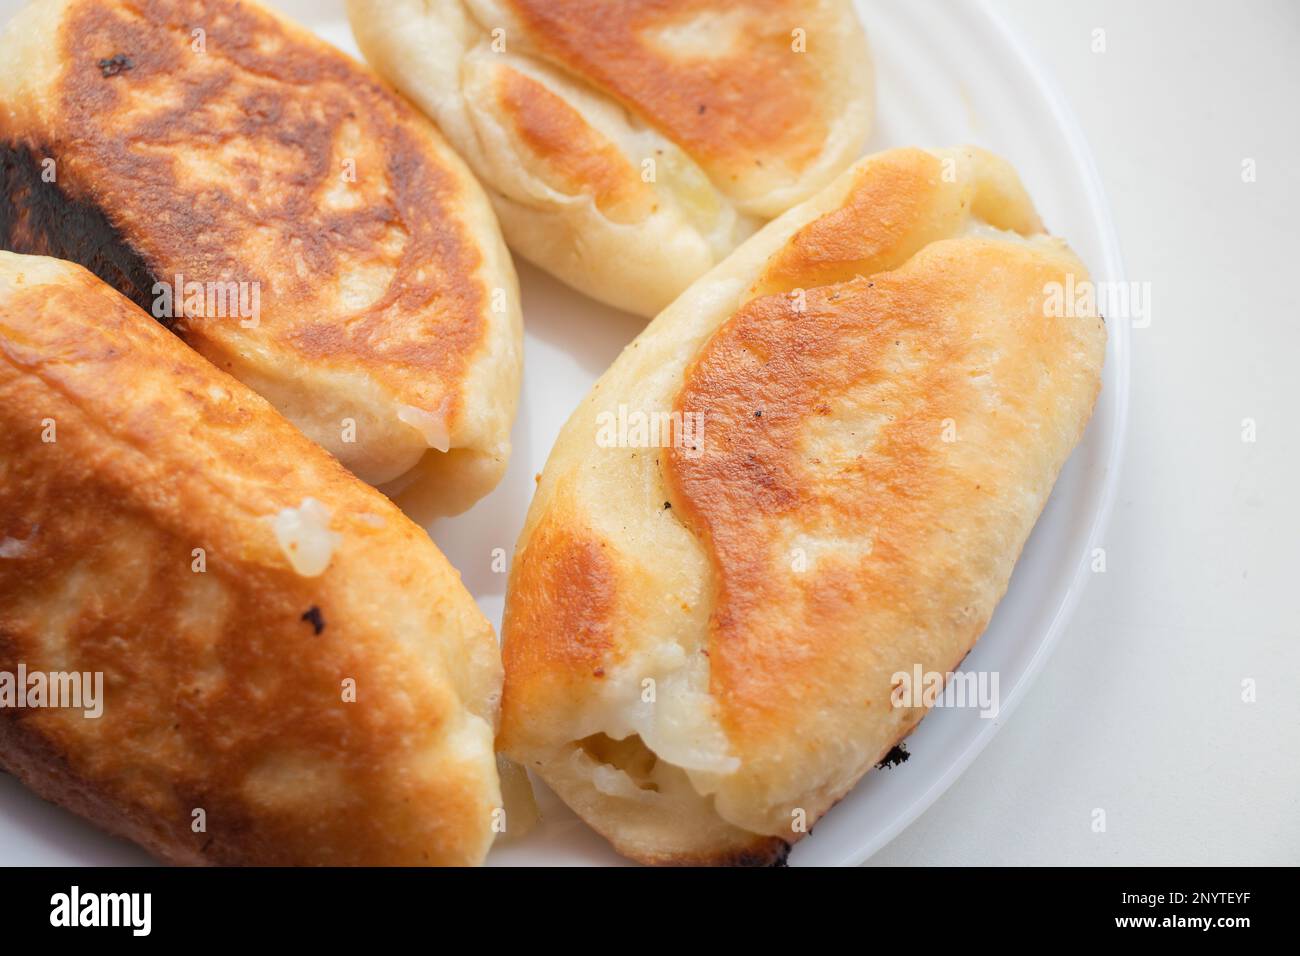 fried pasties on a plate on a white background Stock Photo